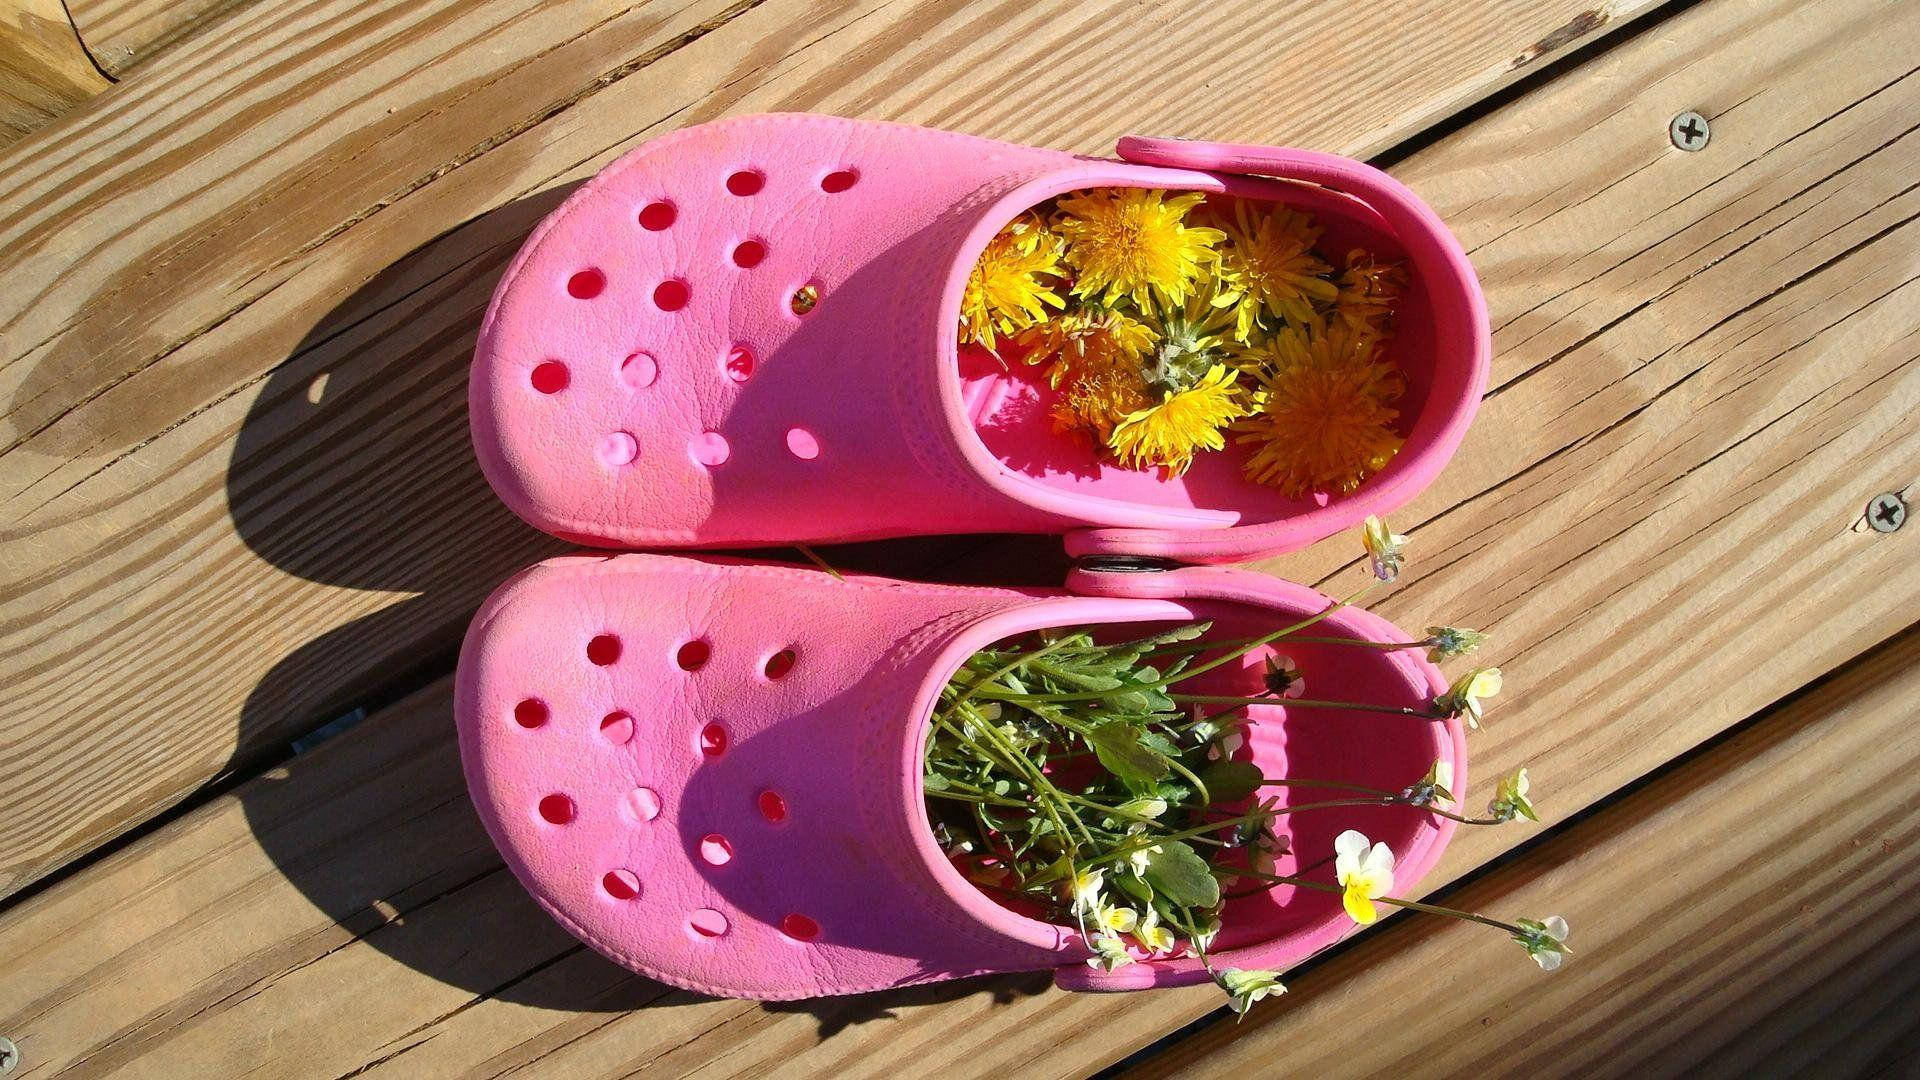 Crocs Footwear With Flowers Background